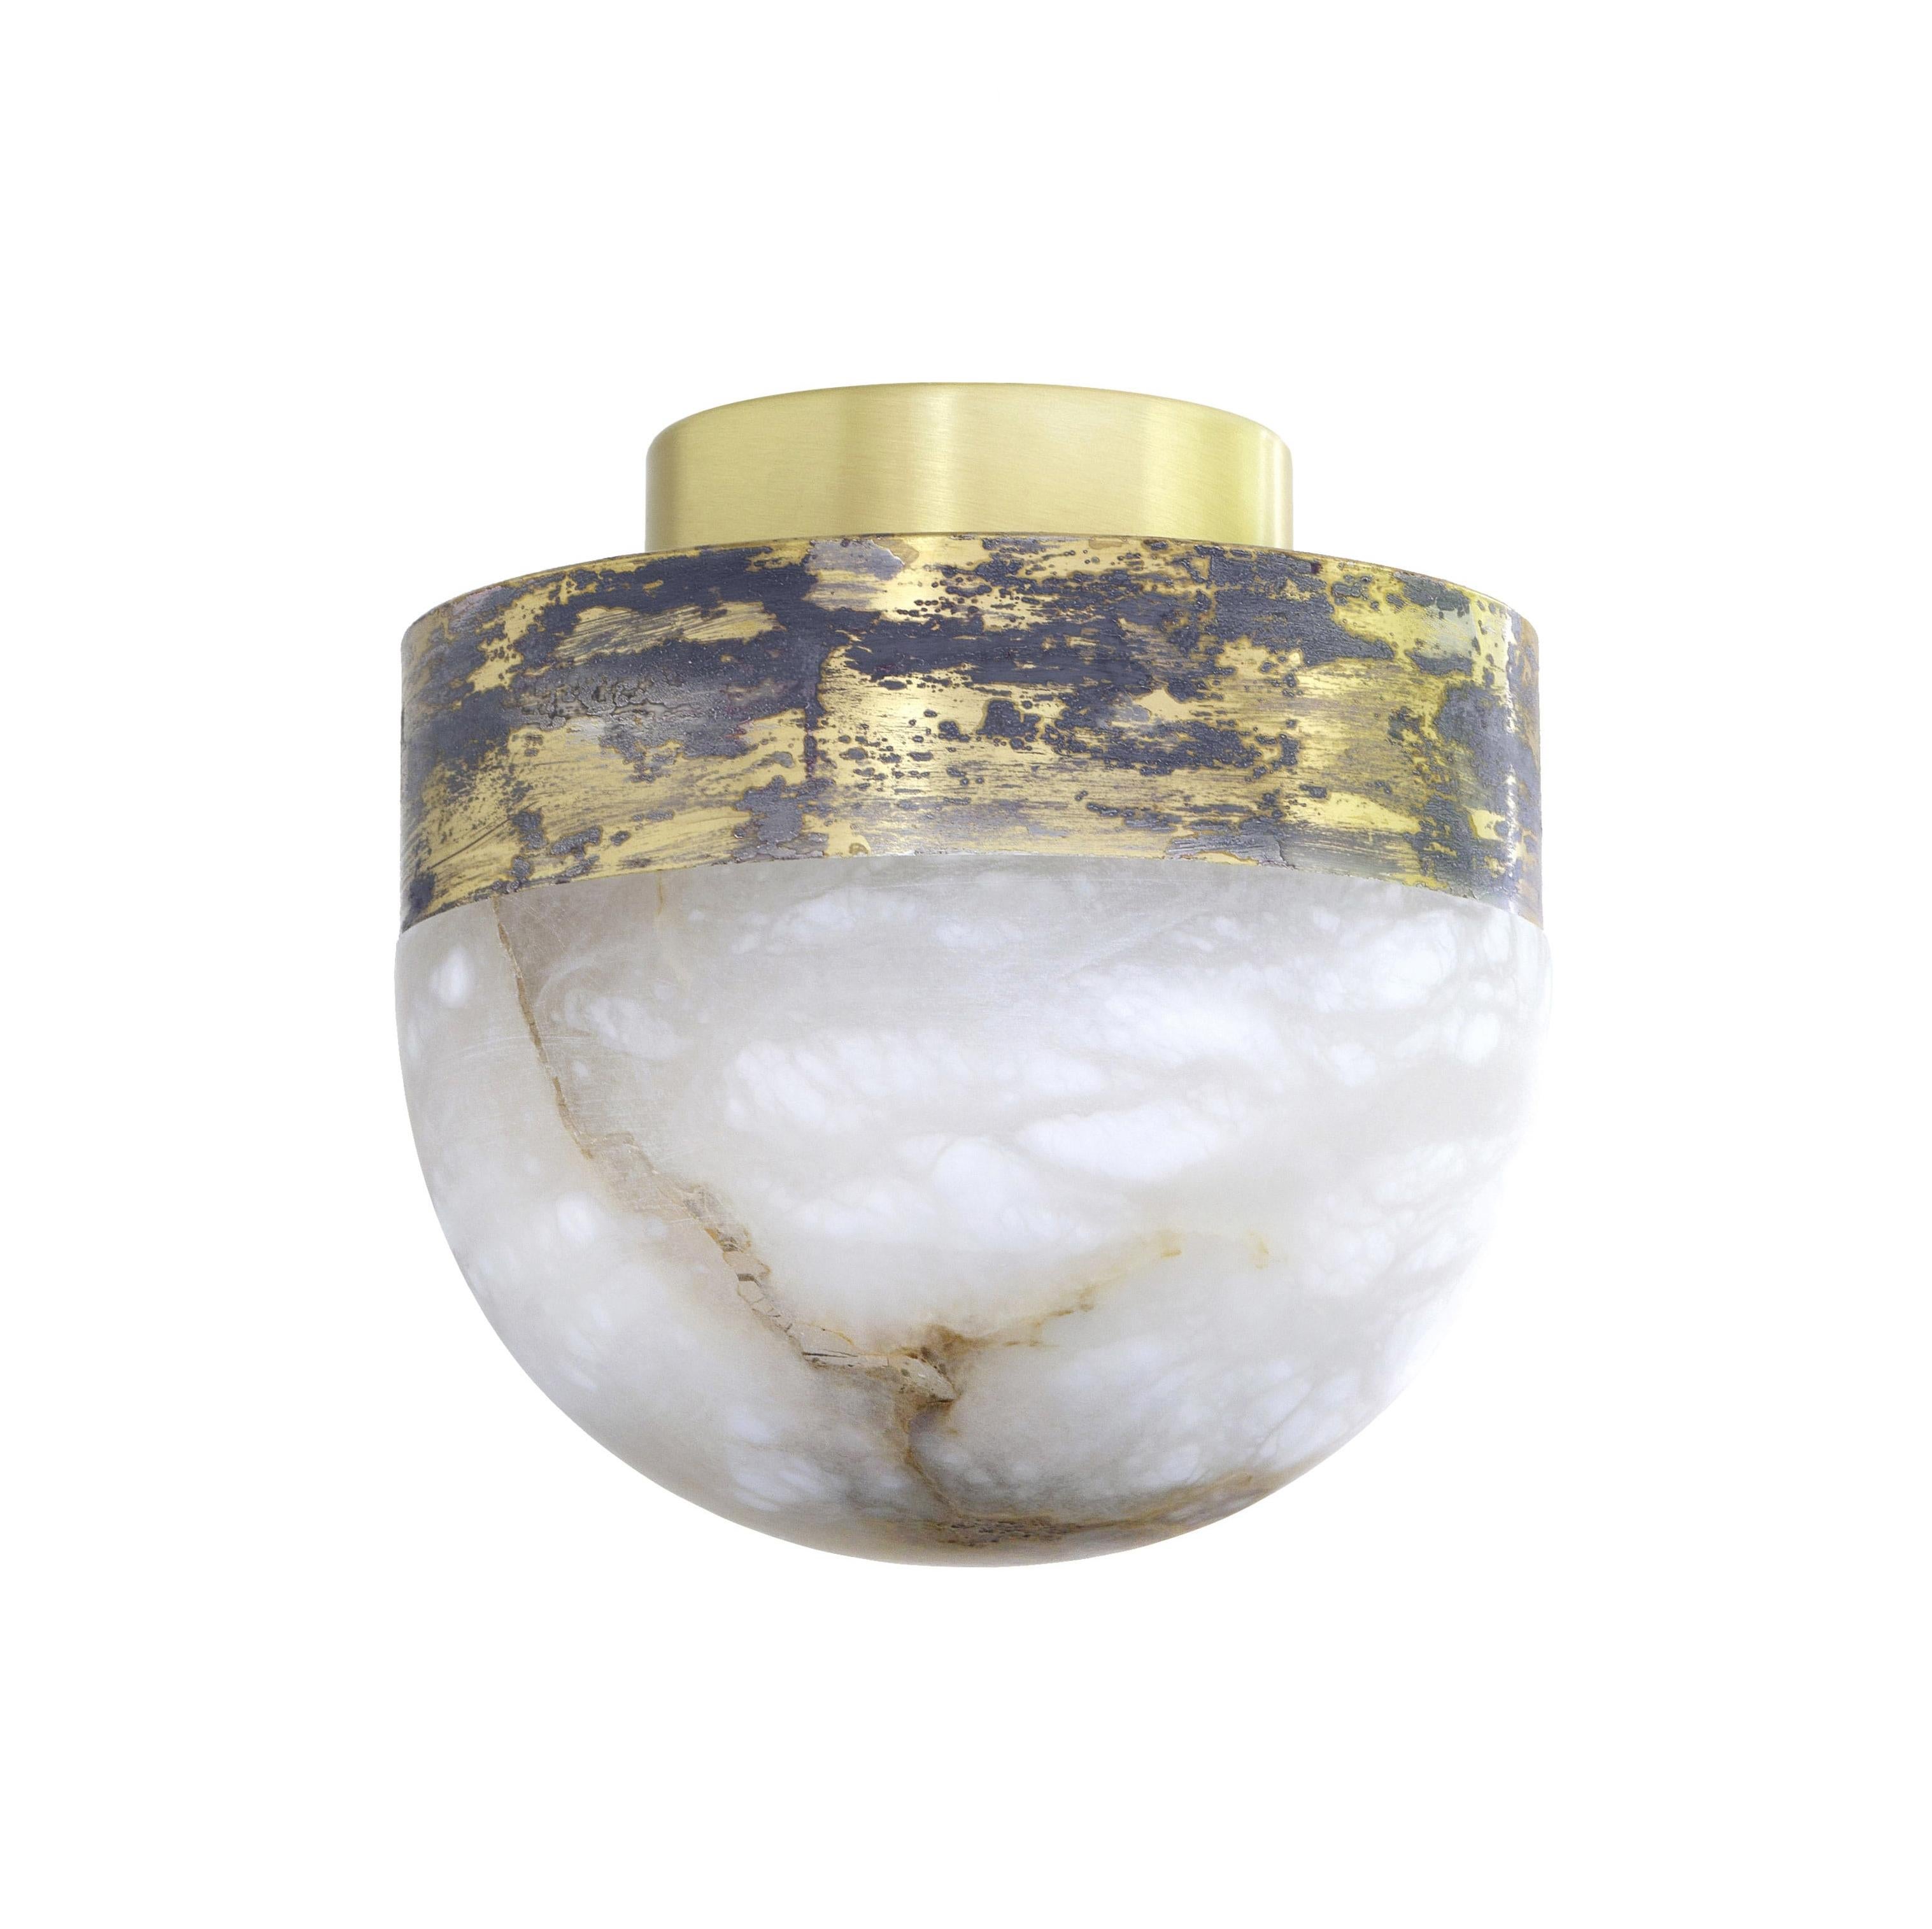 Lucid 200 flush lamp by CTO Lighting
Materials: honed alabaster with bronze base
Also available in honed alabaster with oxidised silvered brass base, honed alabaster with satin brass base
Dimensions: H 20 x W 20 cm

All our lamps can be wired